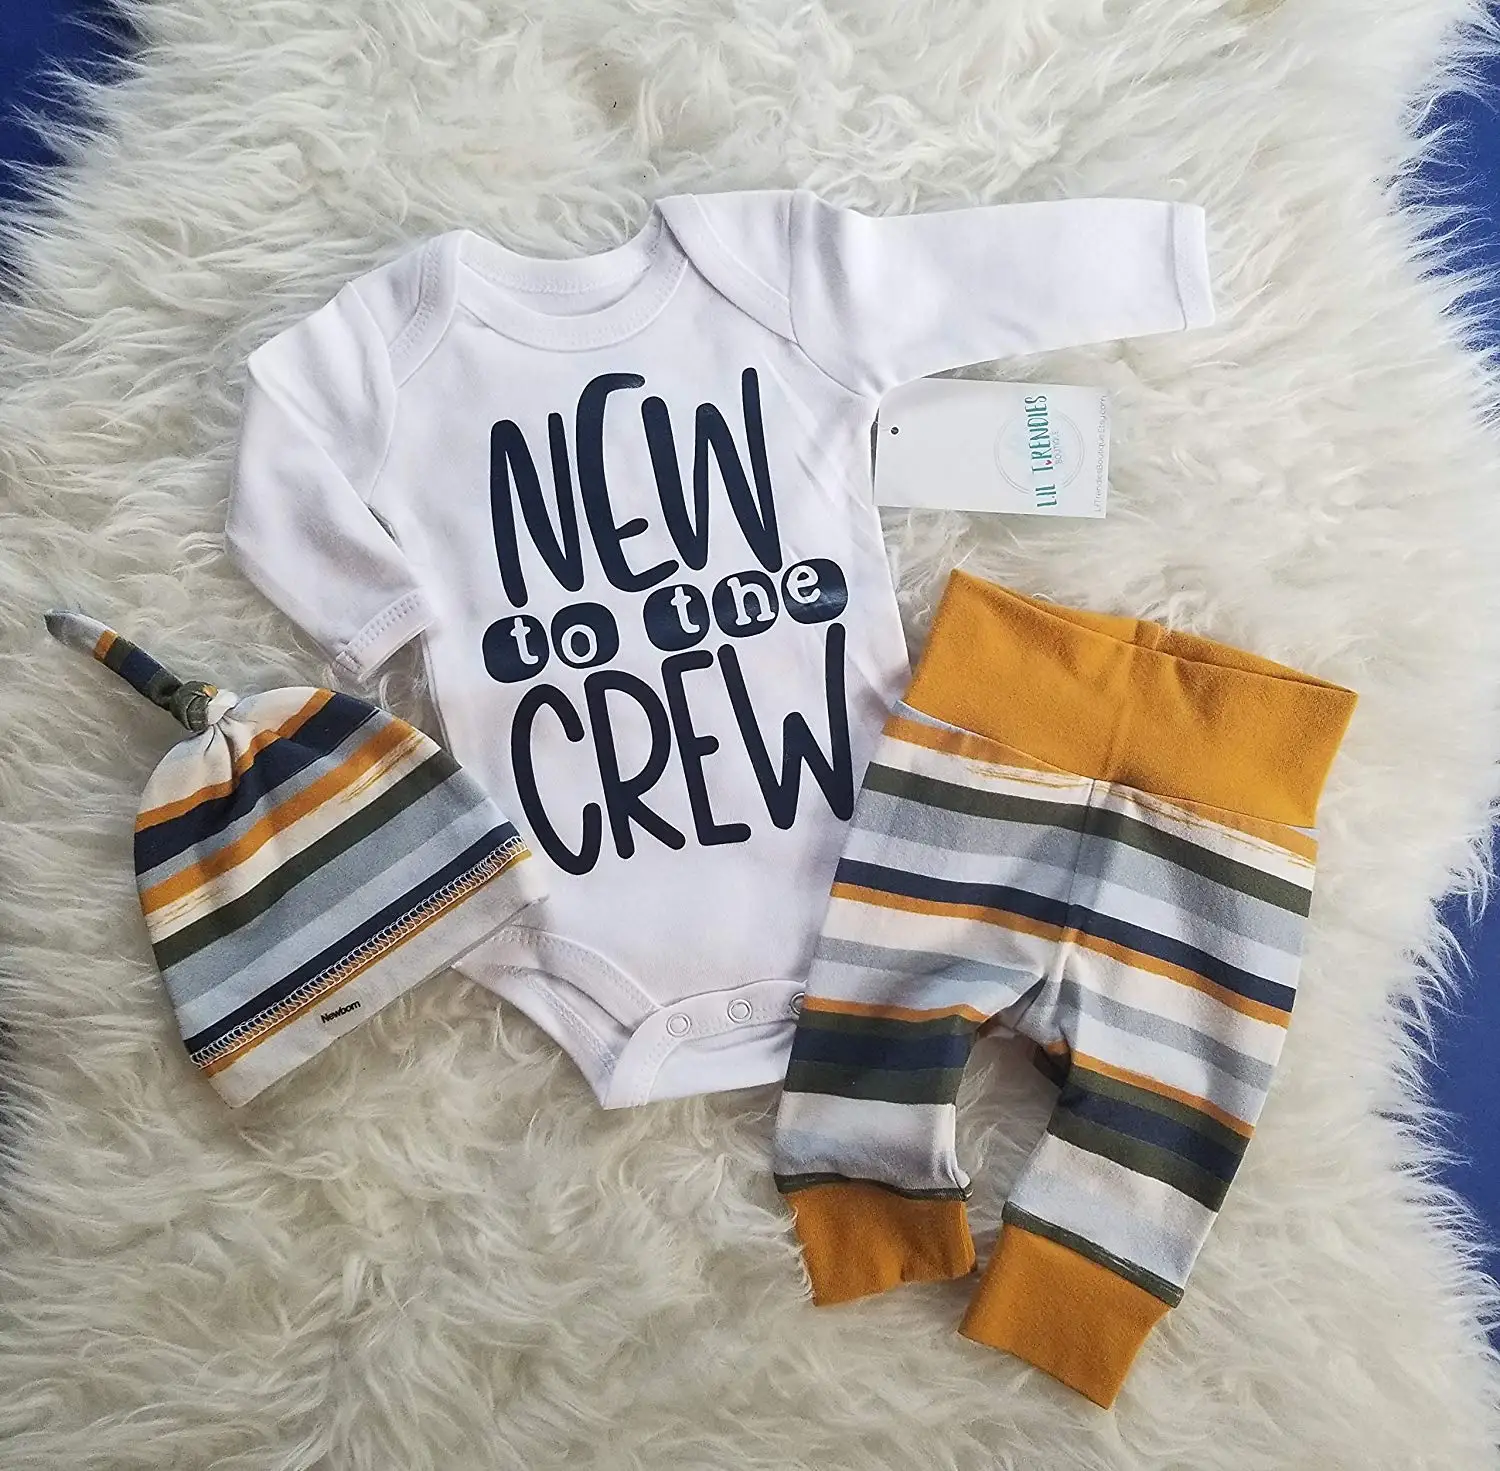 bringing baby home outfit